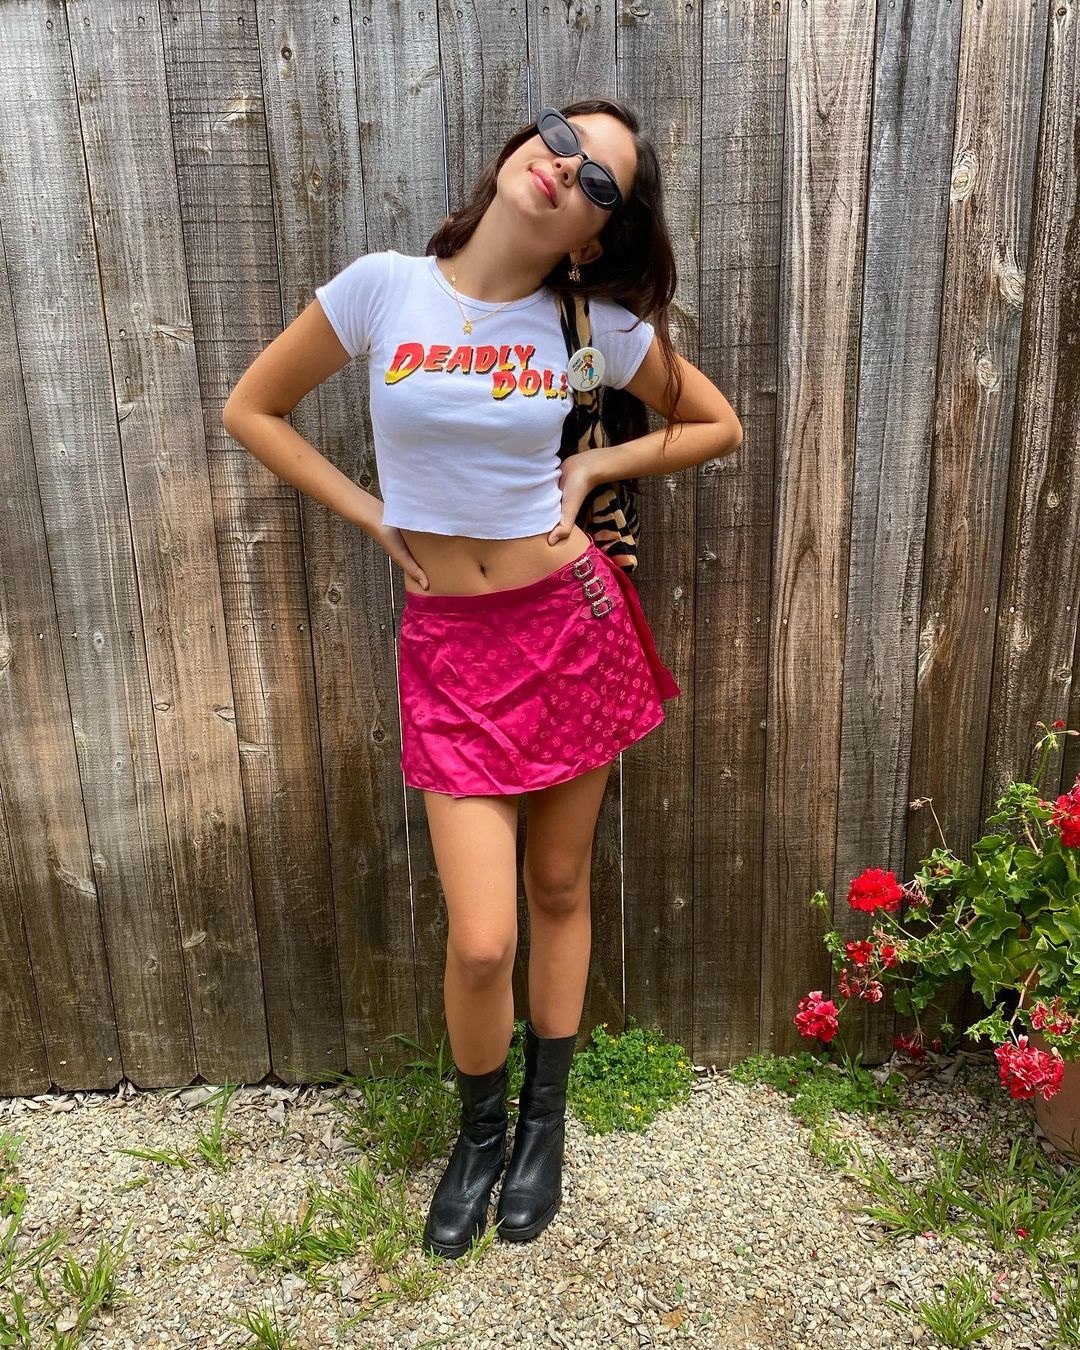 10 Cool T-shirt And Skirt Outfit Combinations To Try